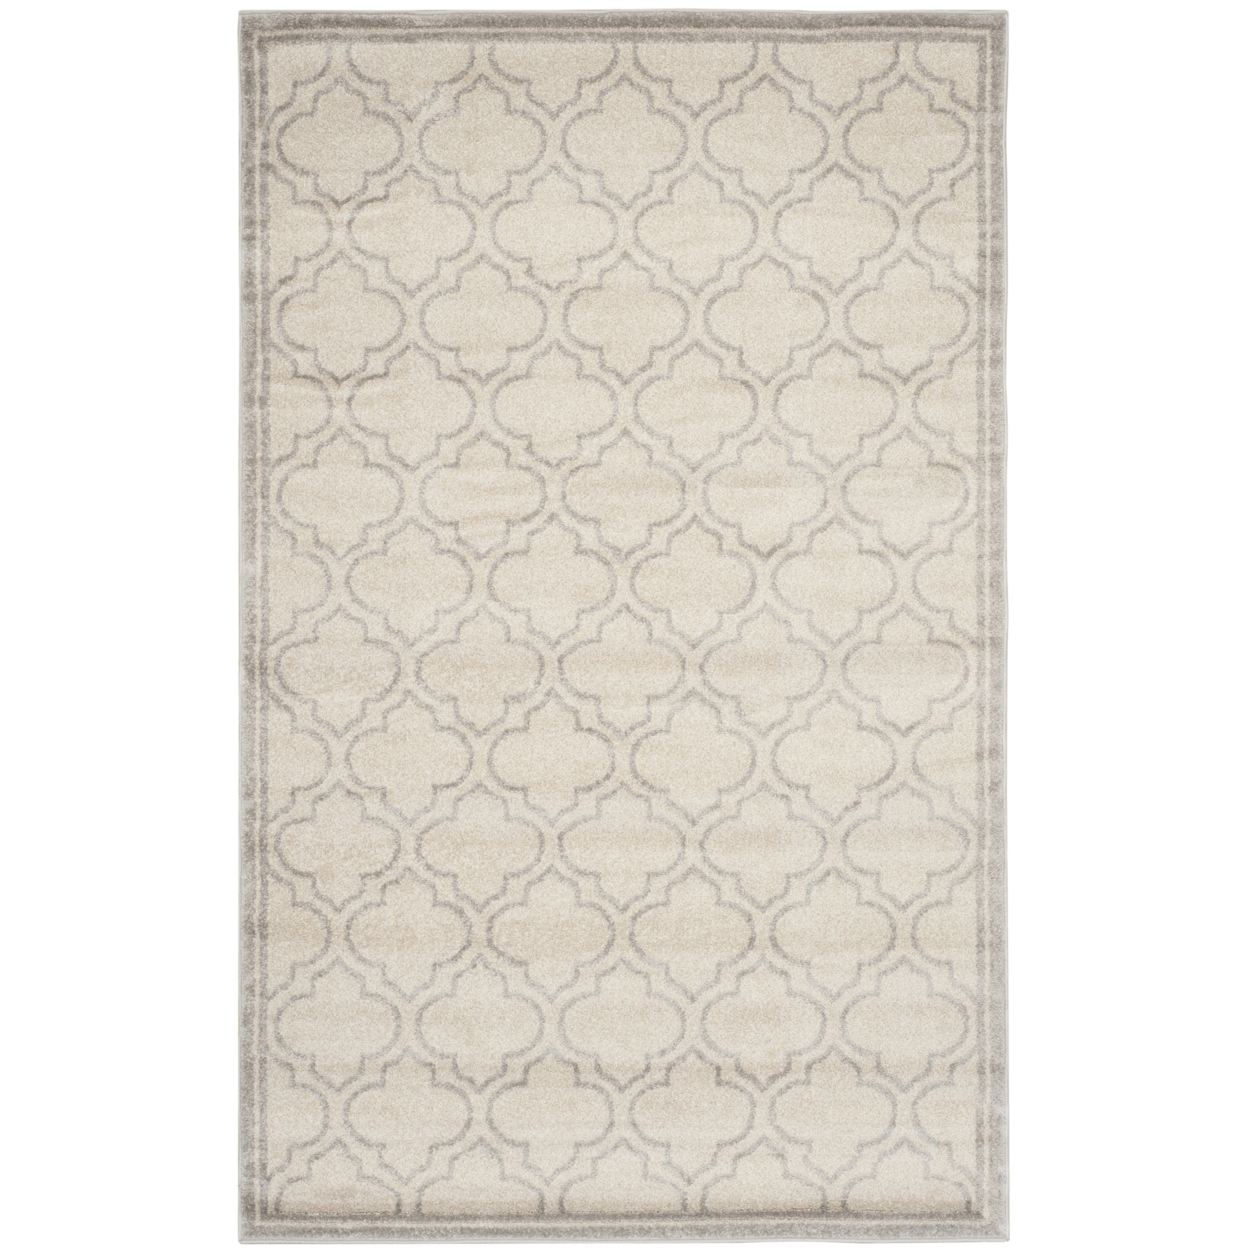 SAFAVIEH Amherst Collection AMT412E Ivory/Light Grey Rug - 4' X 6'